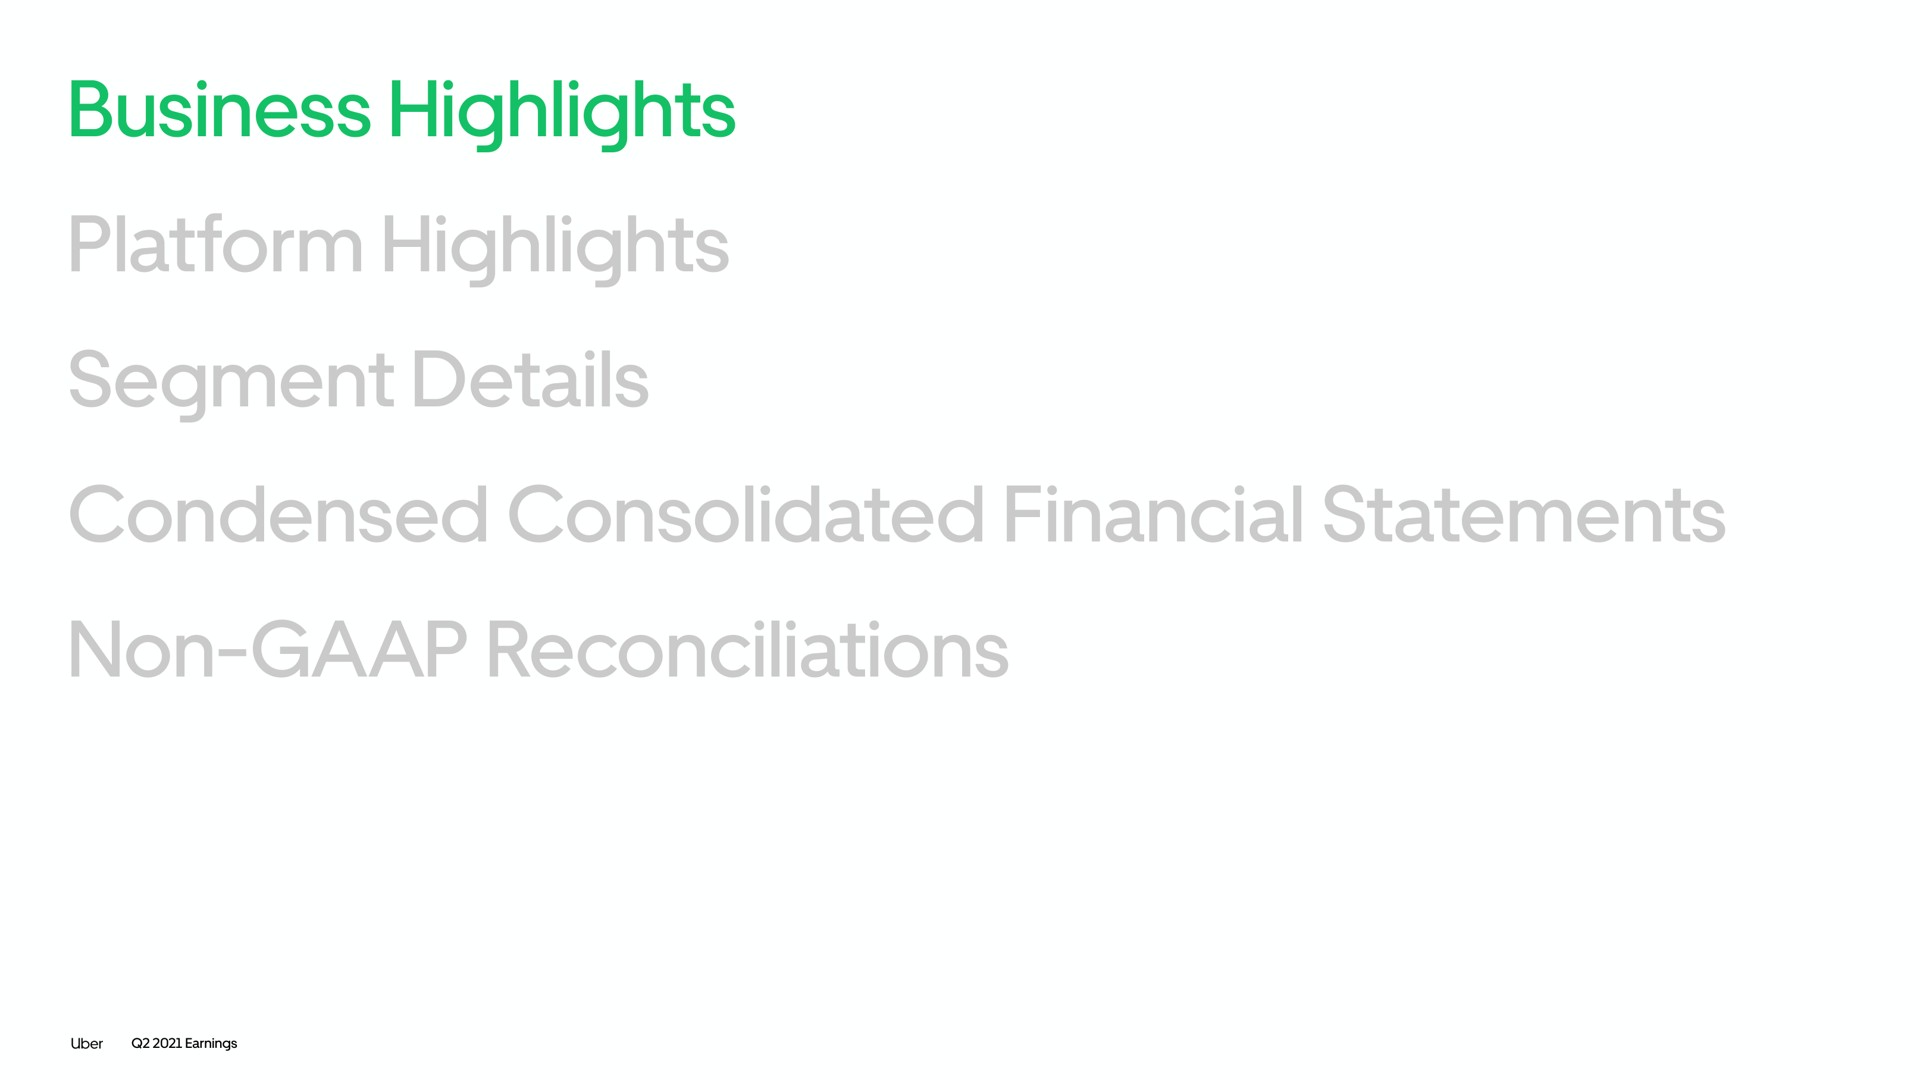 business highlights platform highlights segment details condensed consolidated financial statements non reconciliations | Uber